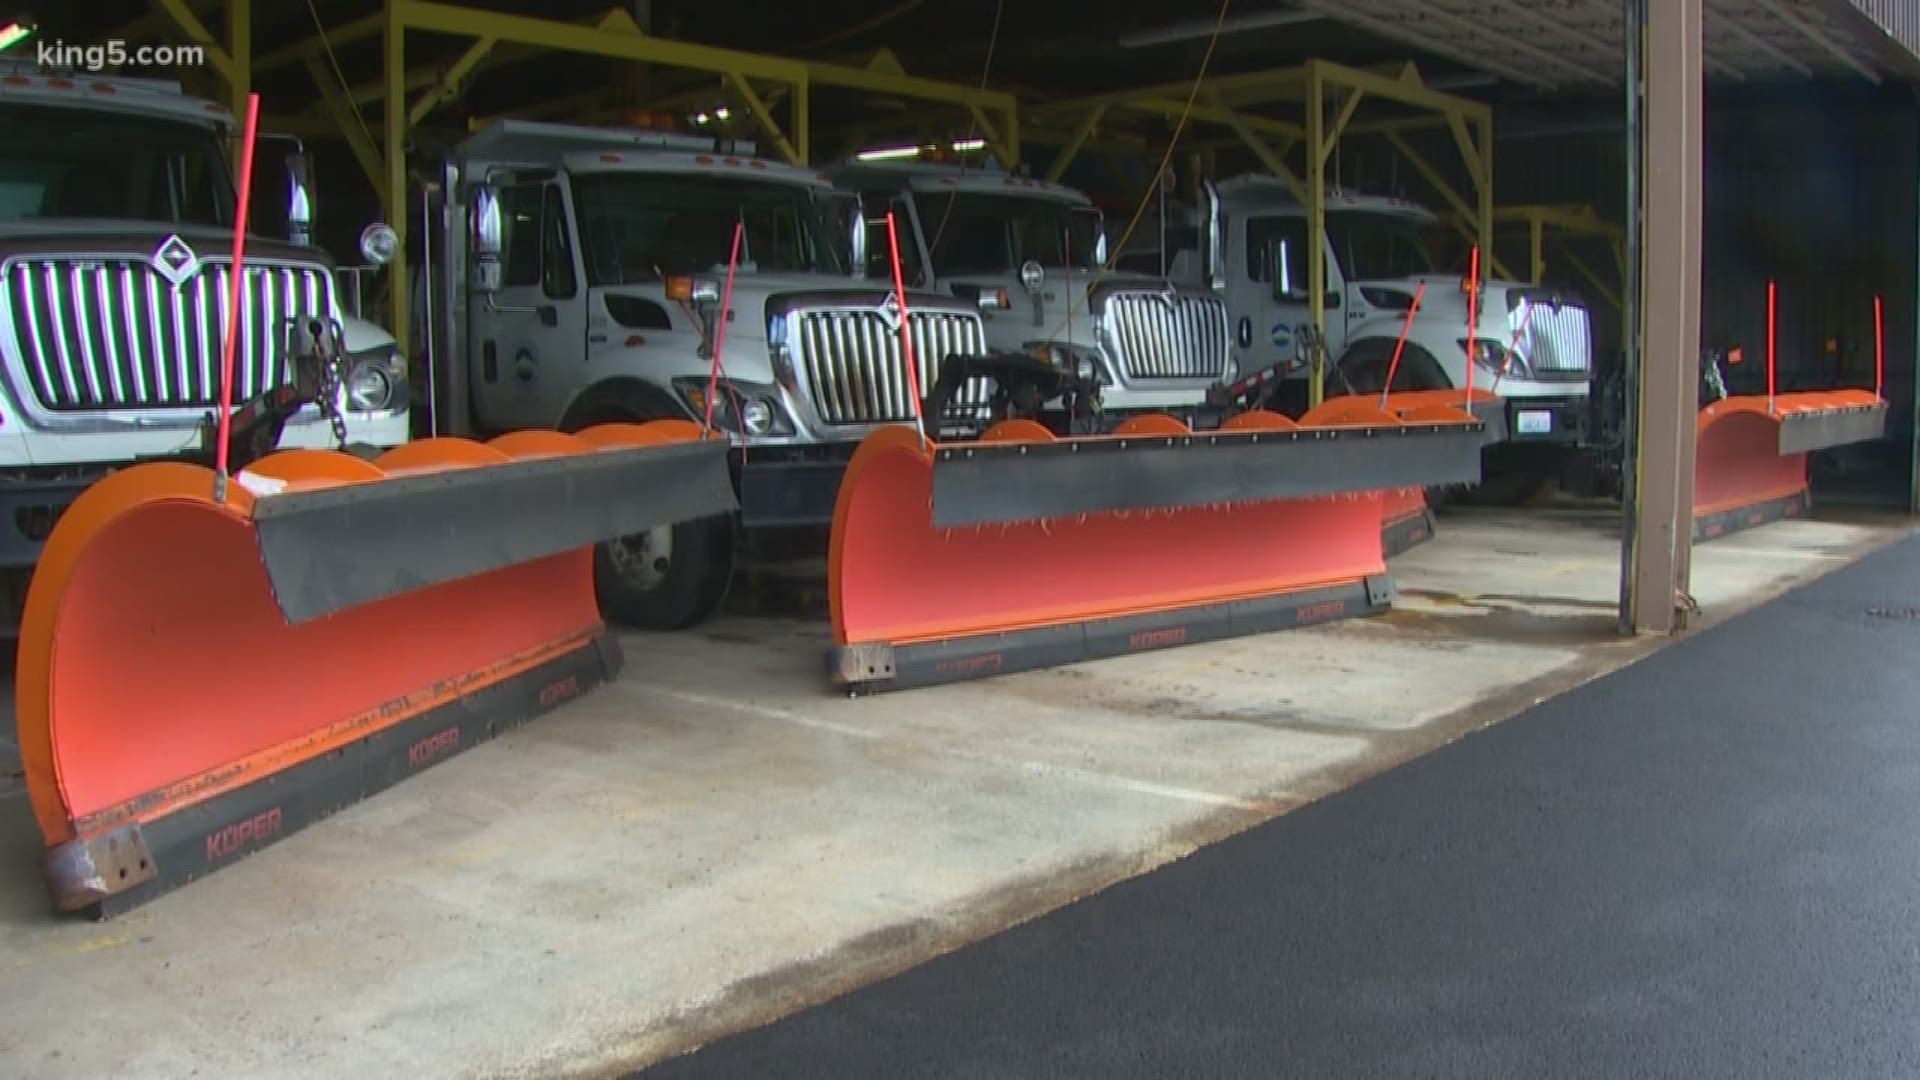 The city of Bellingham and Whatcom County crews are preparing for winter weather to move in. Snow isn't expected to be a major issue, but wind and ice could be.